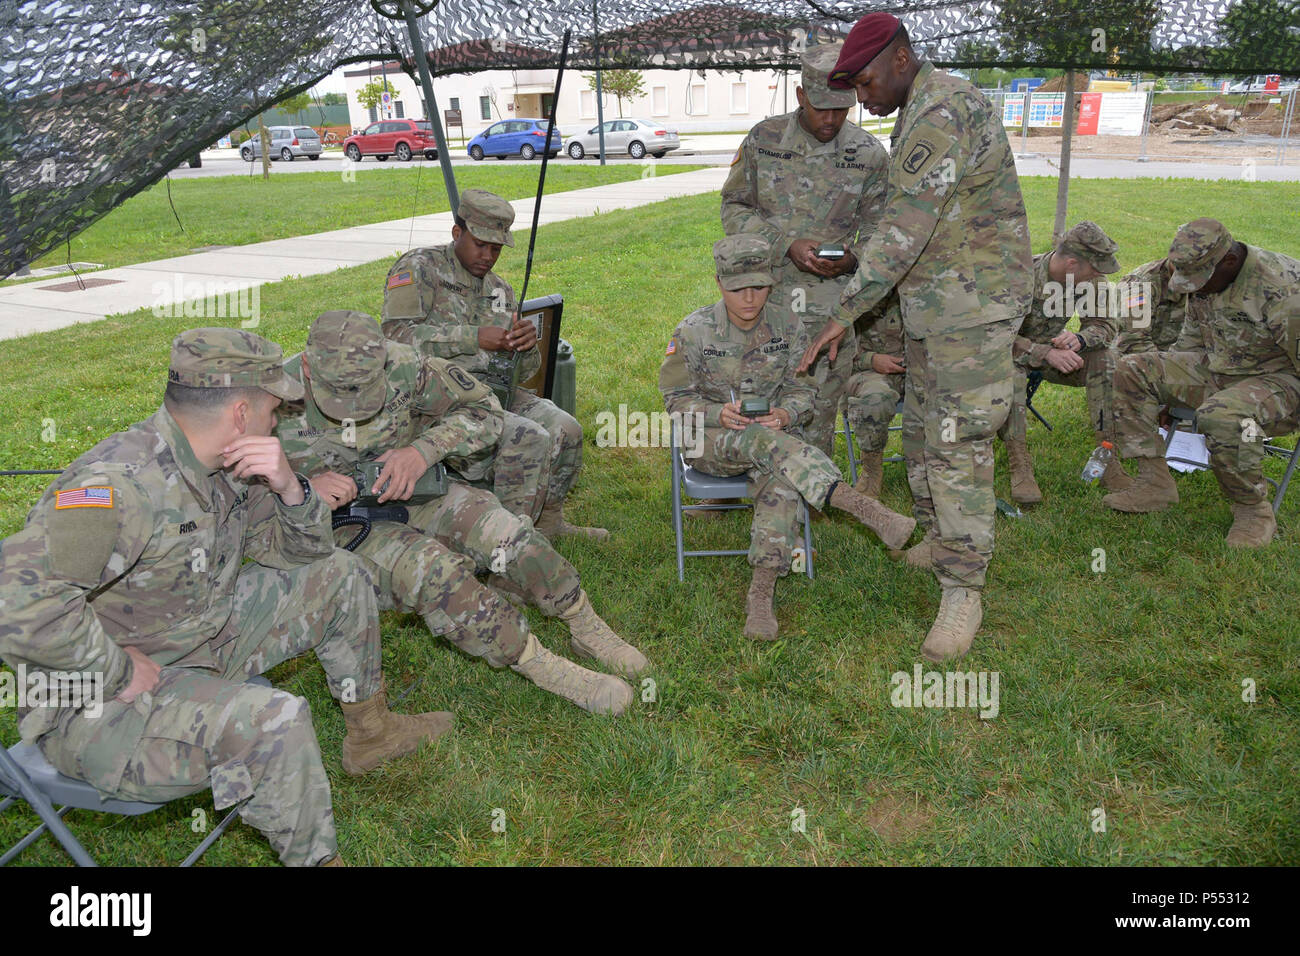 U.S. Army Paratroopers assigned to the 173rd Airborne Brigade Support Battalion, 173rd Airborne Brigade, participate in a radio challenge during the Junior Leader Challenge at Caserma Del Din, Vicenza, Italy May 10, 2017.  The 173rd Airborne Brigade is the U.S. Army Contingency Response Force in Europe, capable of projecting ready forces anywhere in the U.S. European, Africa or Central Commands areas of responsibility within 18 hours. Stock Photo